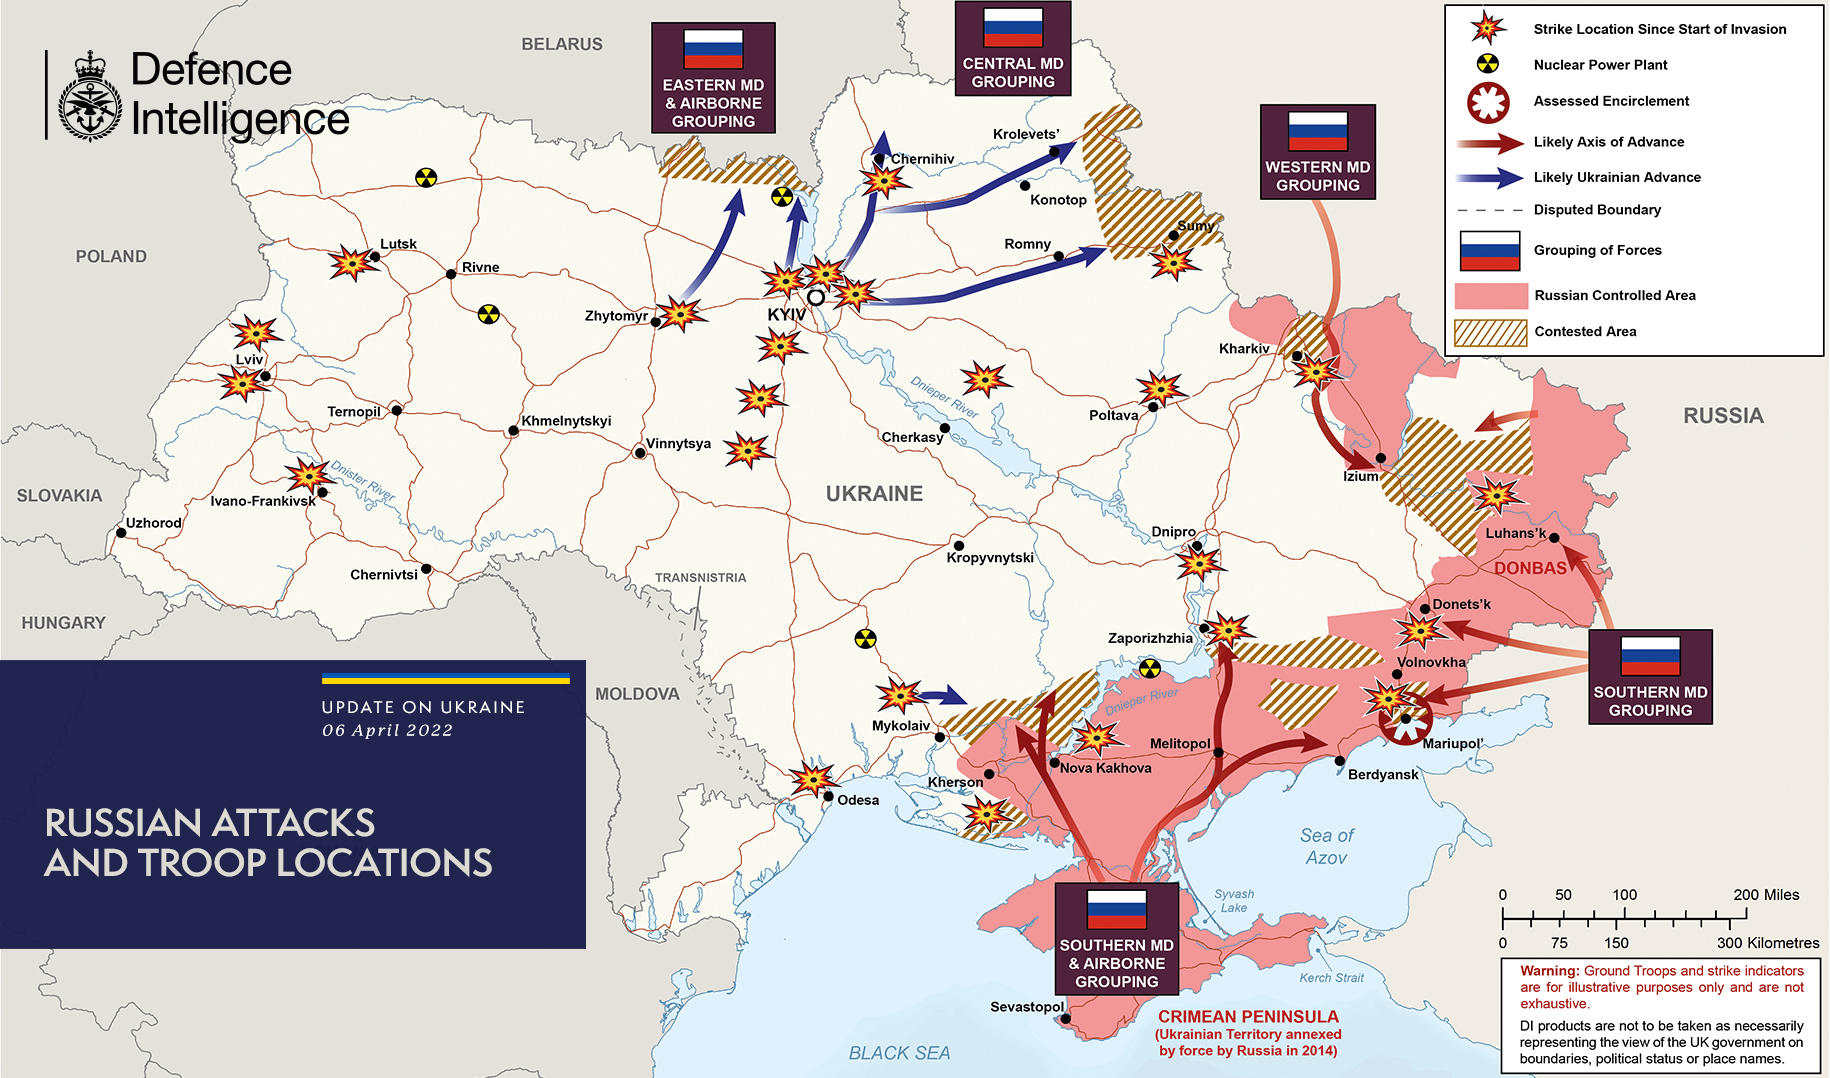 Russian attacks and troop locations map 06/04/22